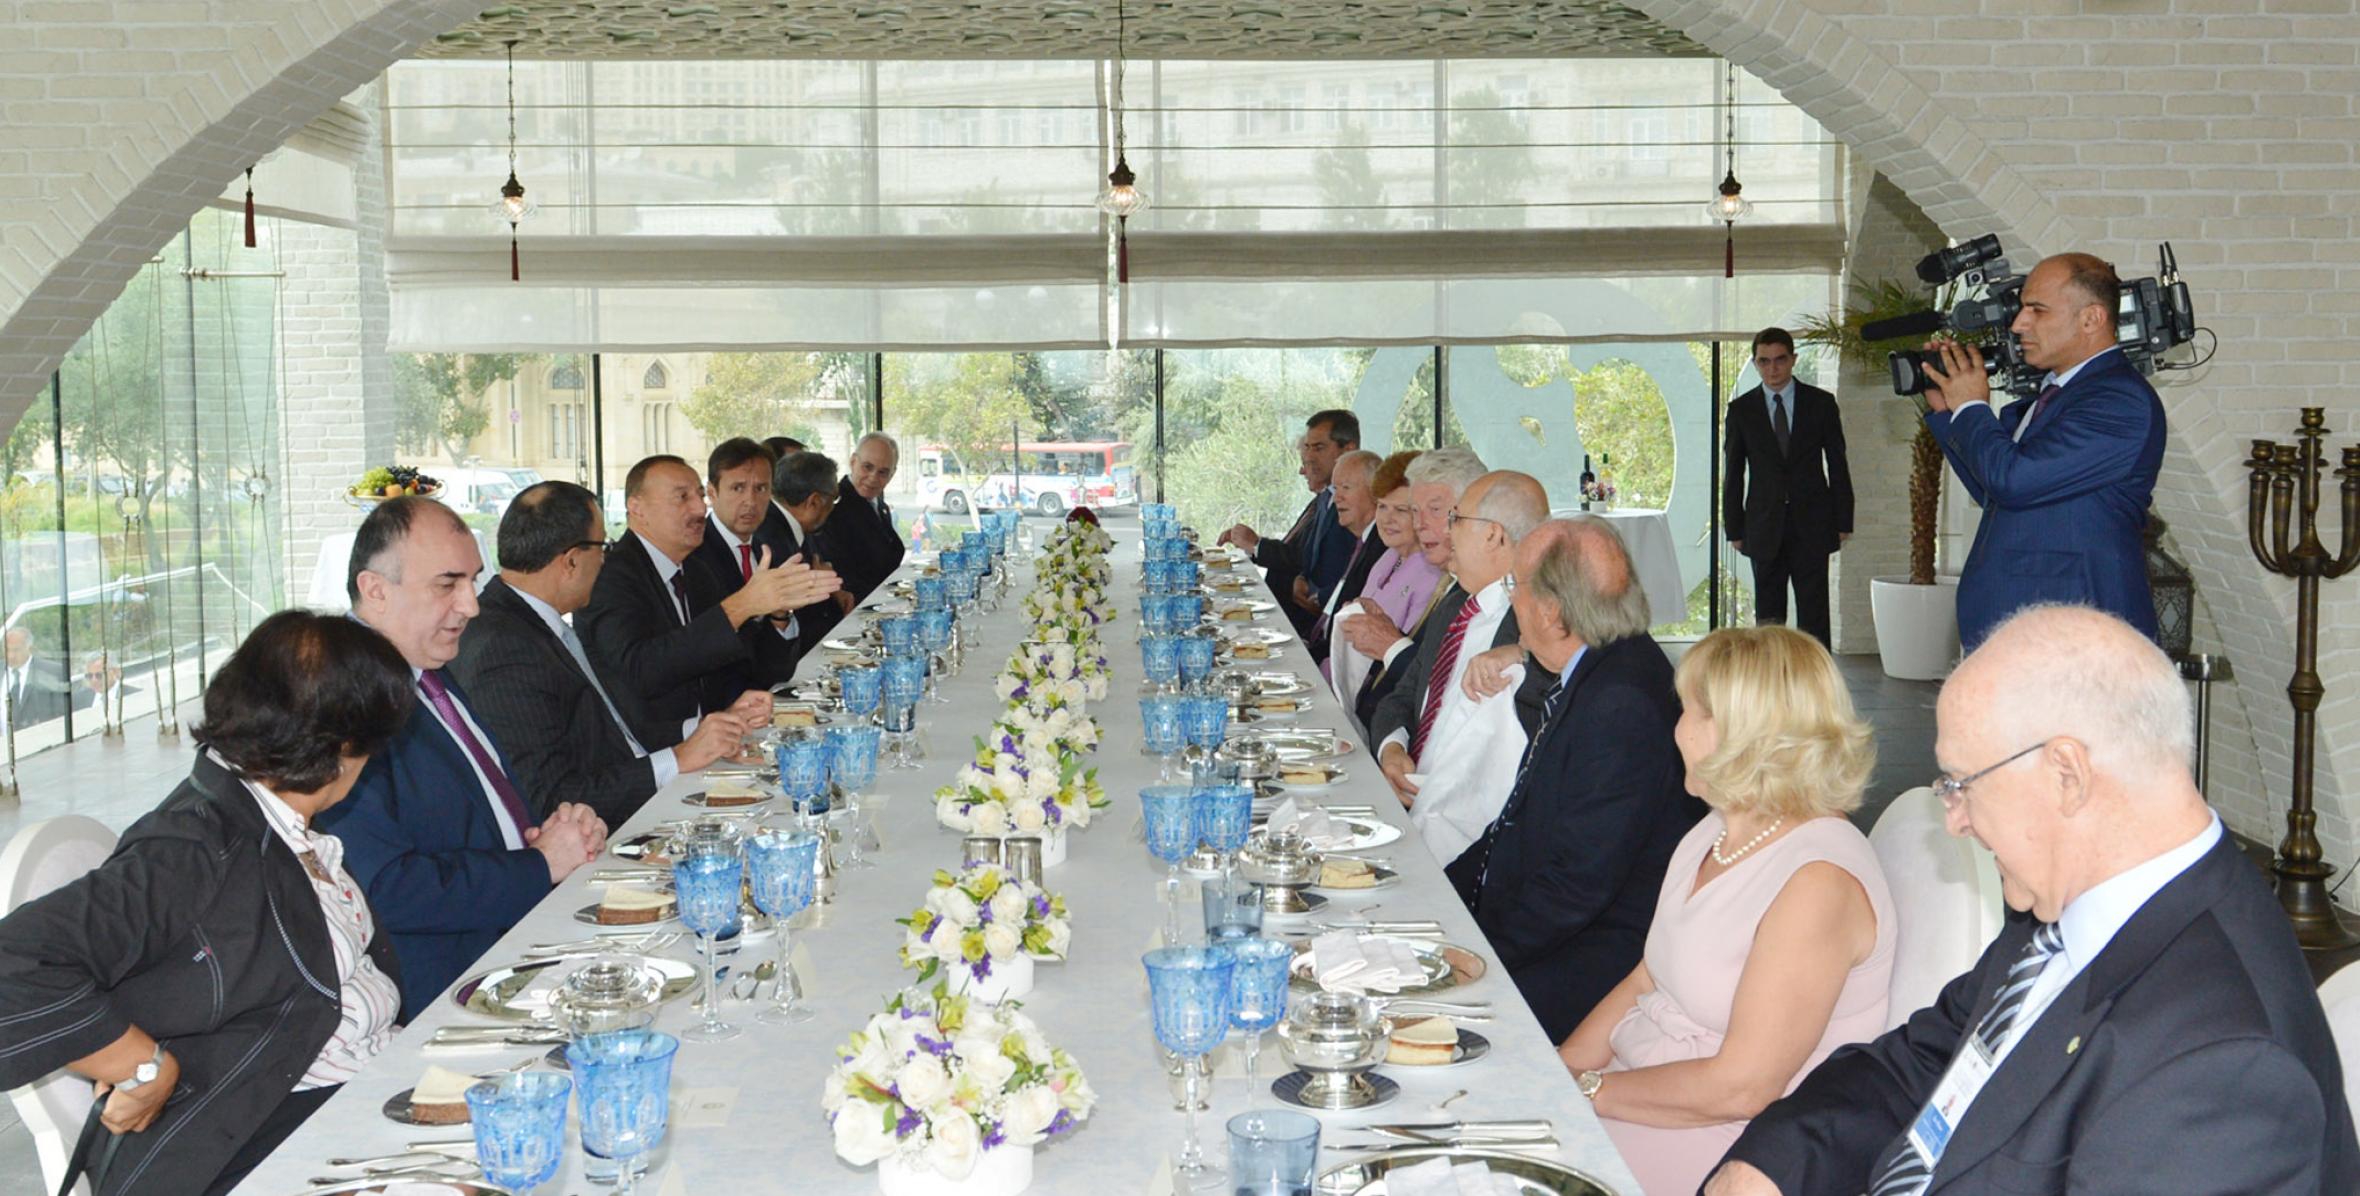 Ilham Aliyev hosted a dinner in honor of the participants of the preparatory high-level meeting of the International Center of Nizami Ganjavi and the Club of Madrid